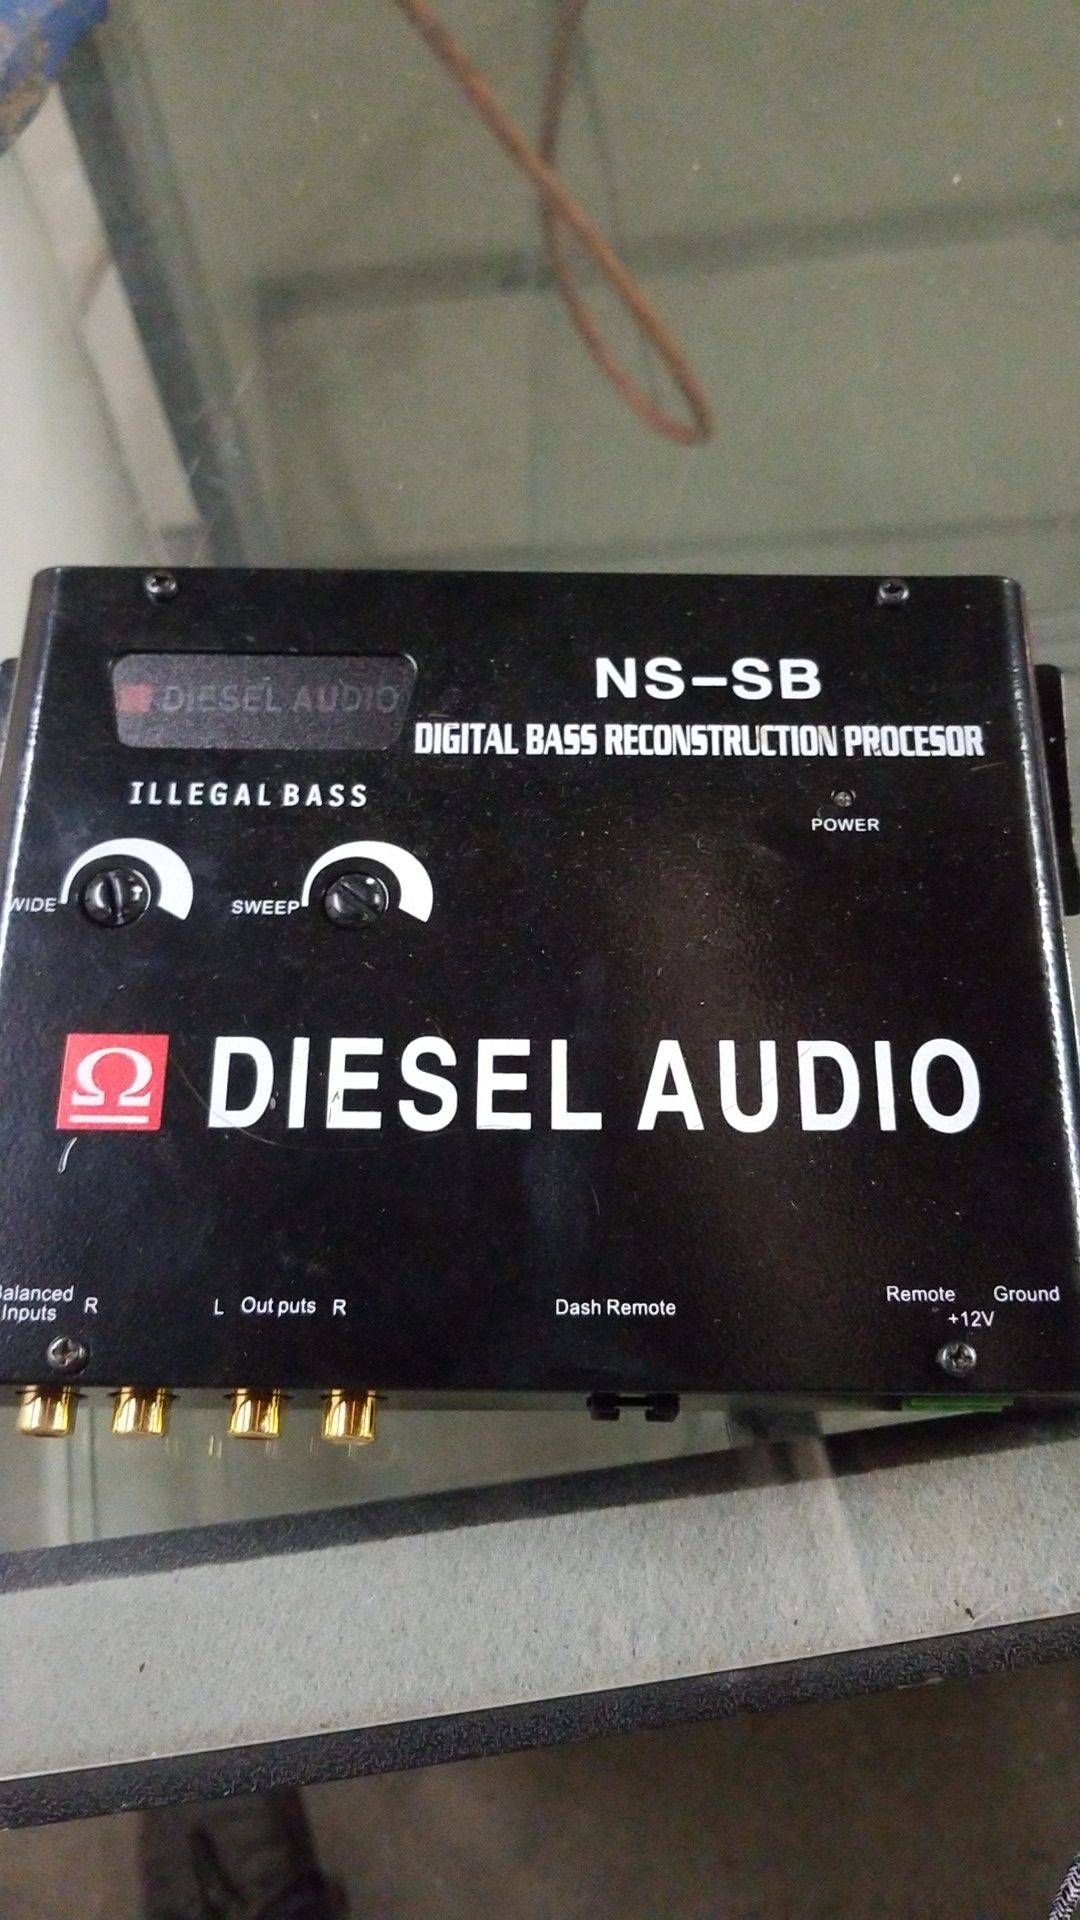 hire Fed up Maintenance Diesel Audio NS-SB Digital Bass Reconstruction Processor for Sale in Los  Angeles, CA - OfferUp